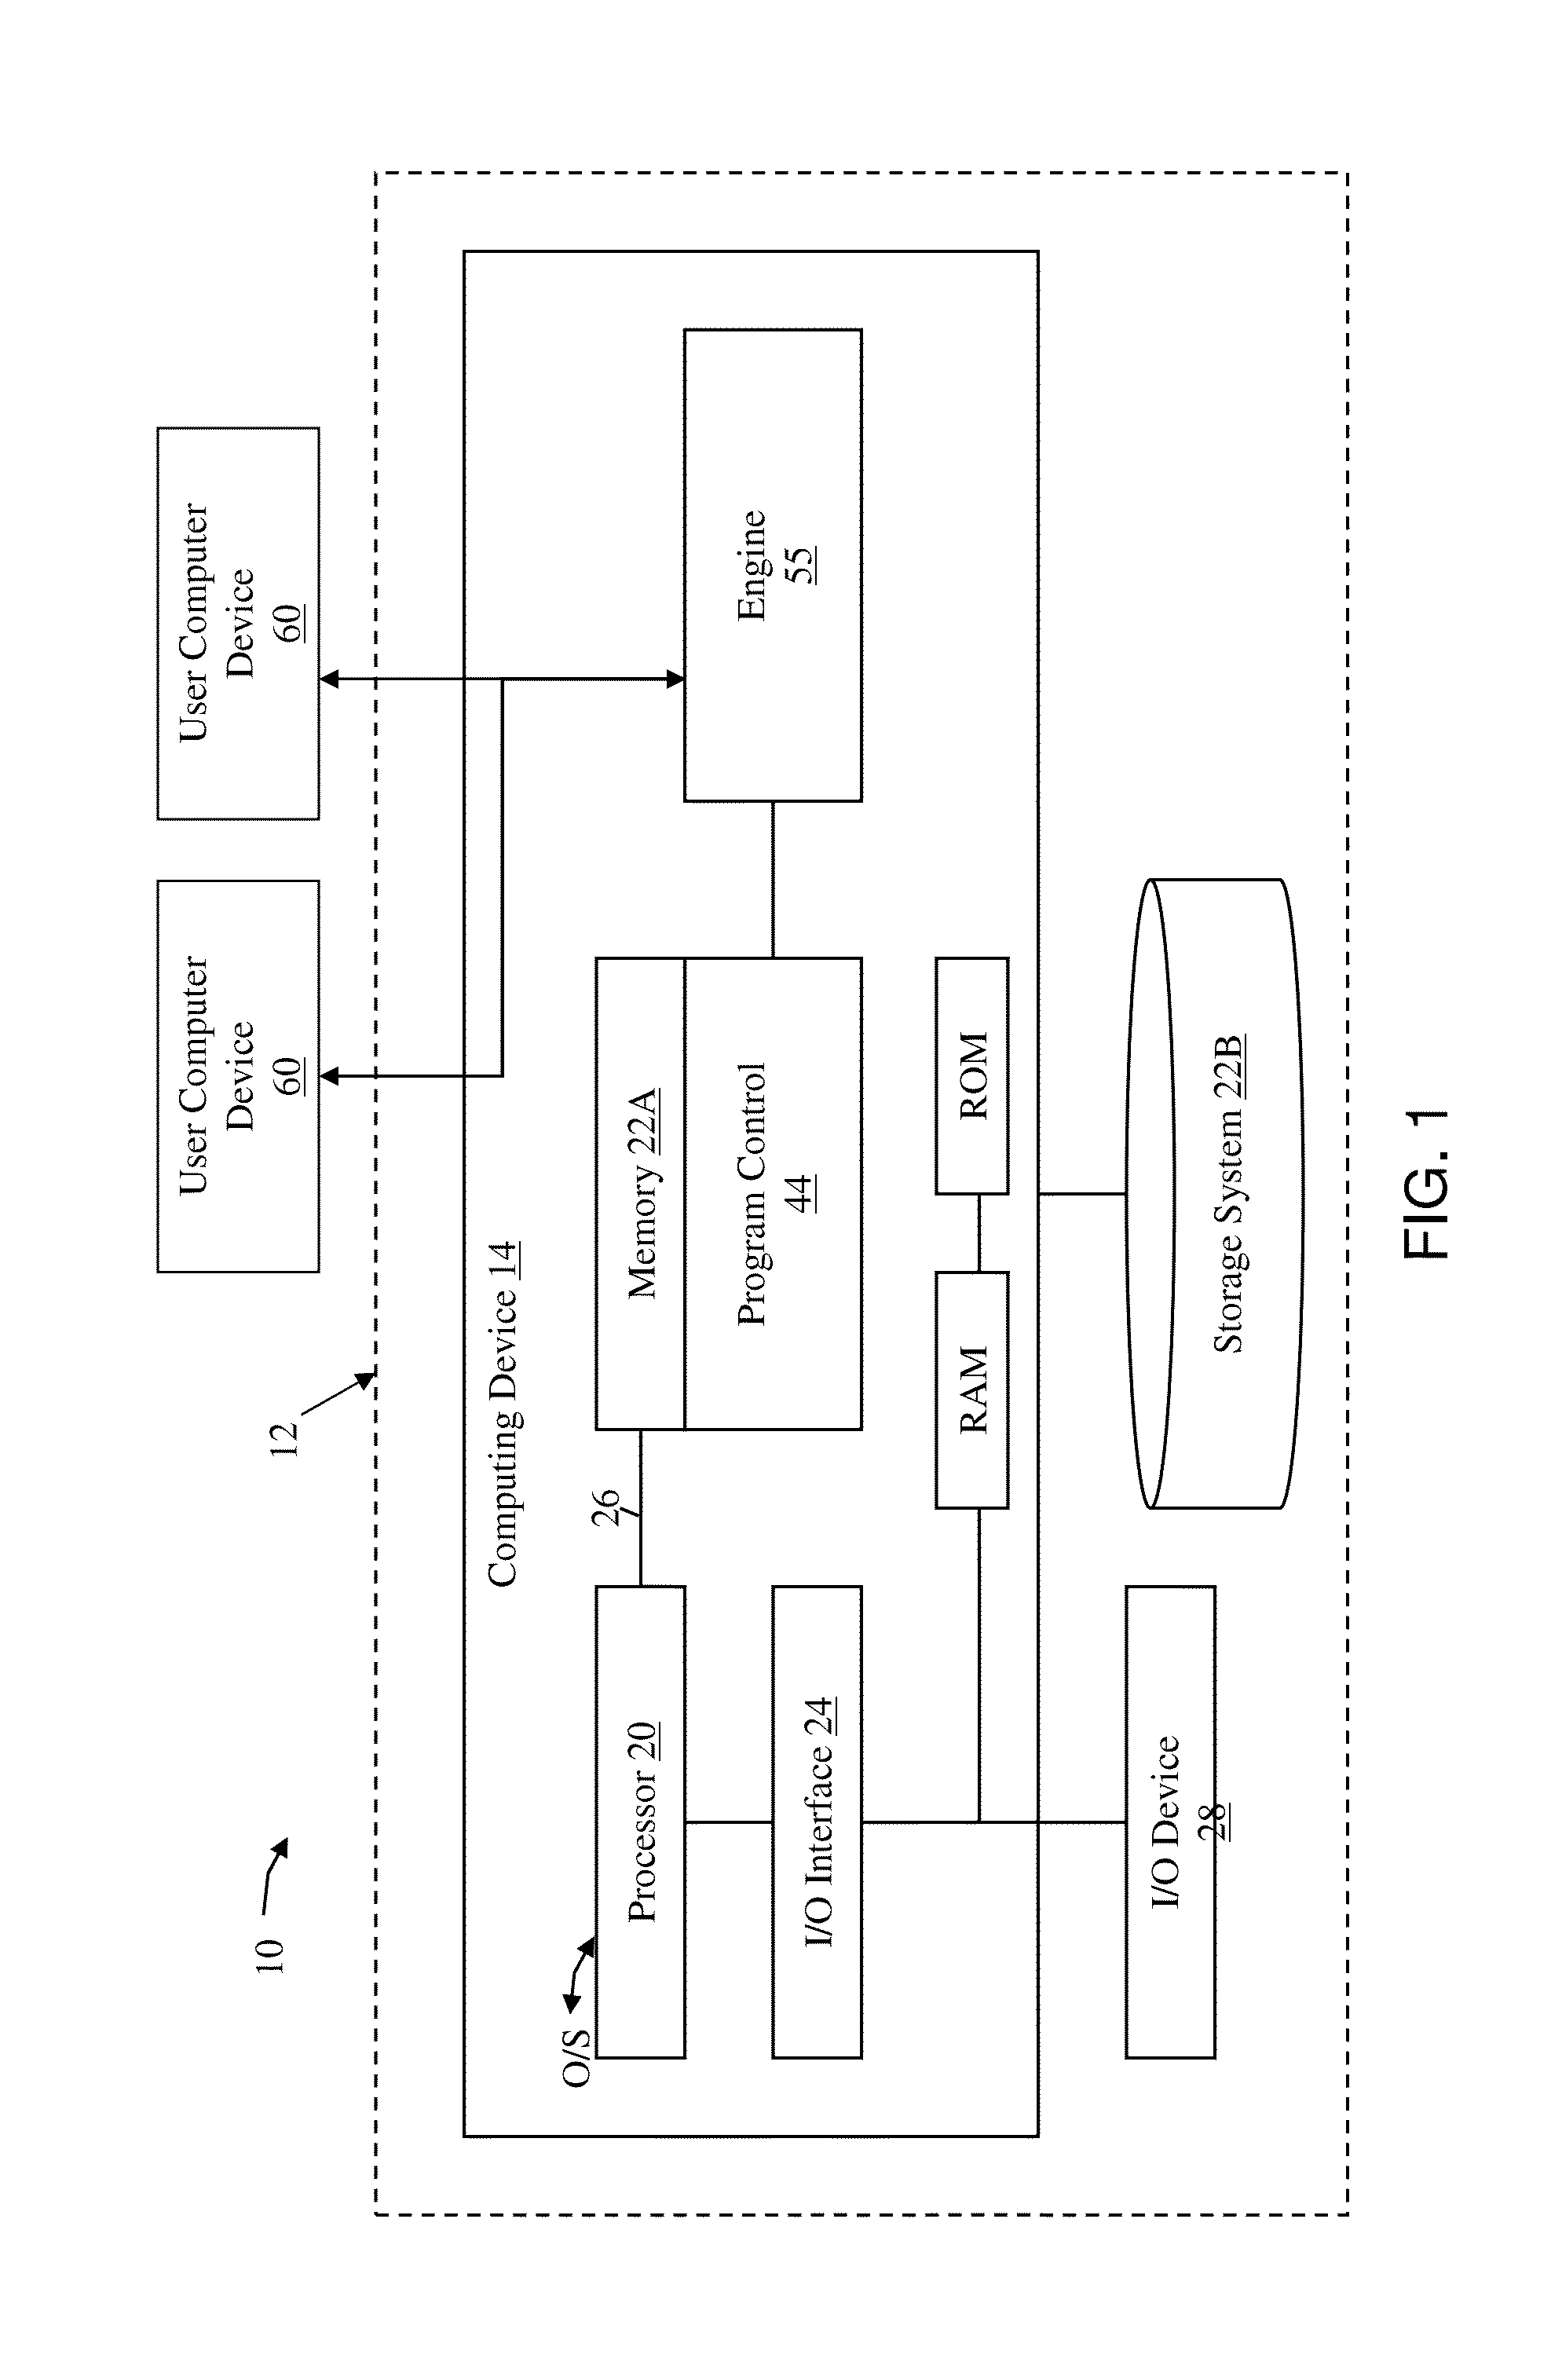 Social networking system and methods of implementation